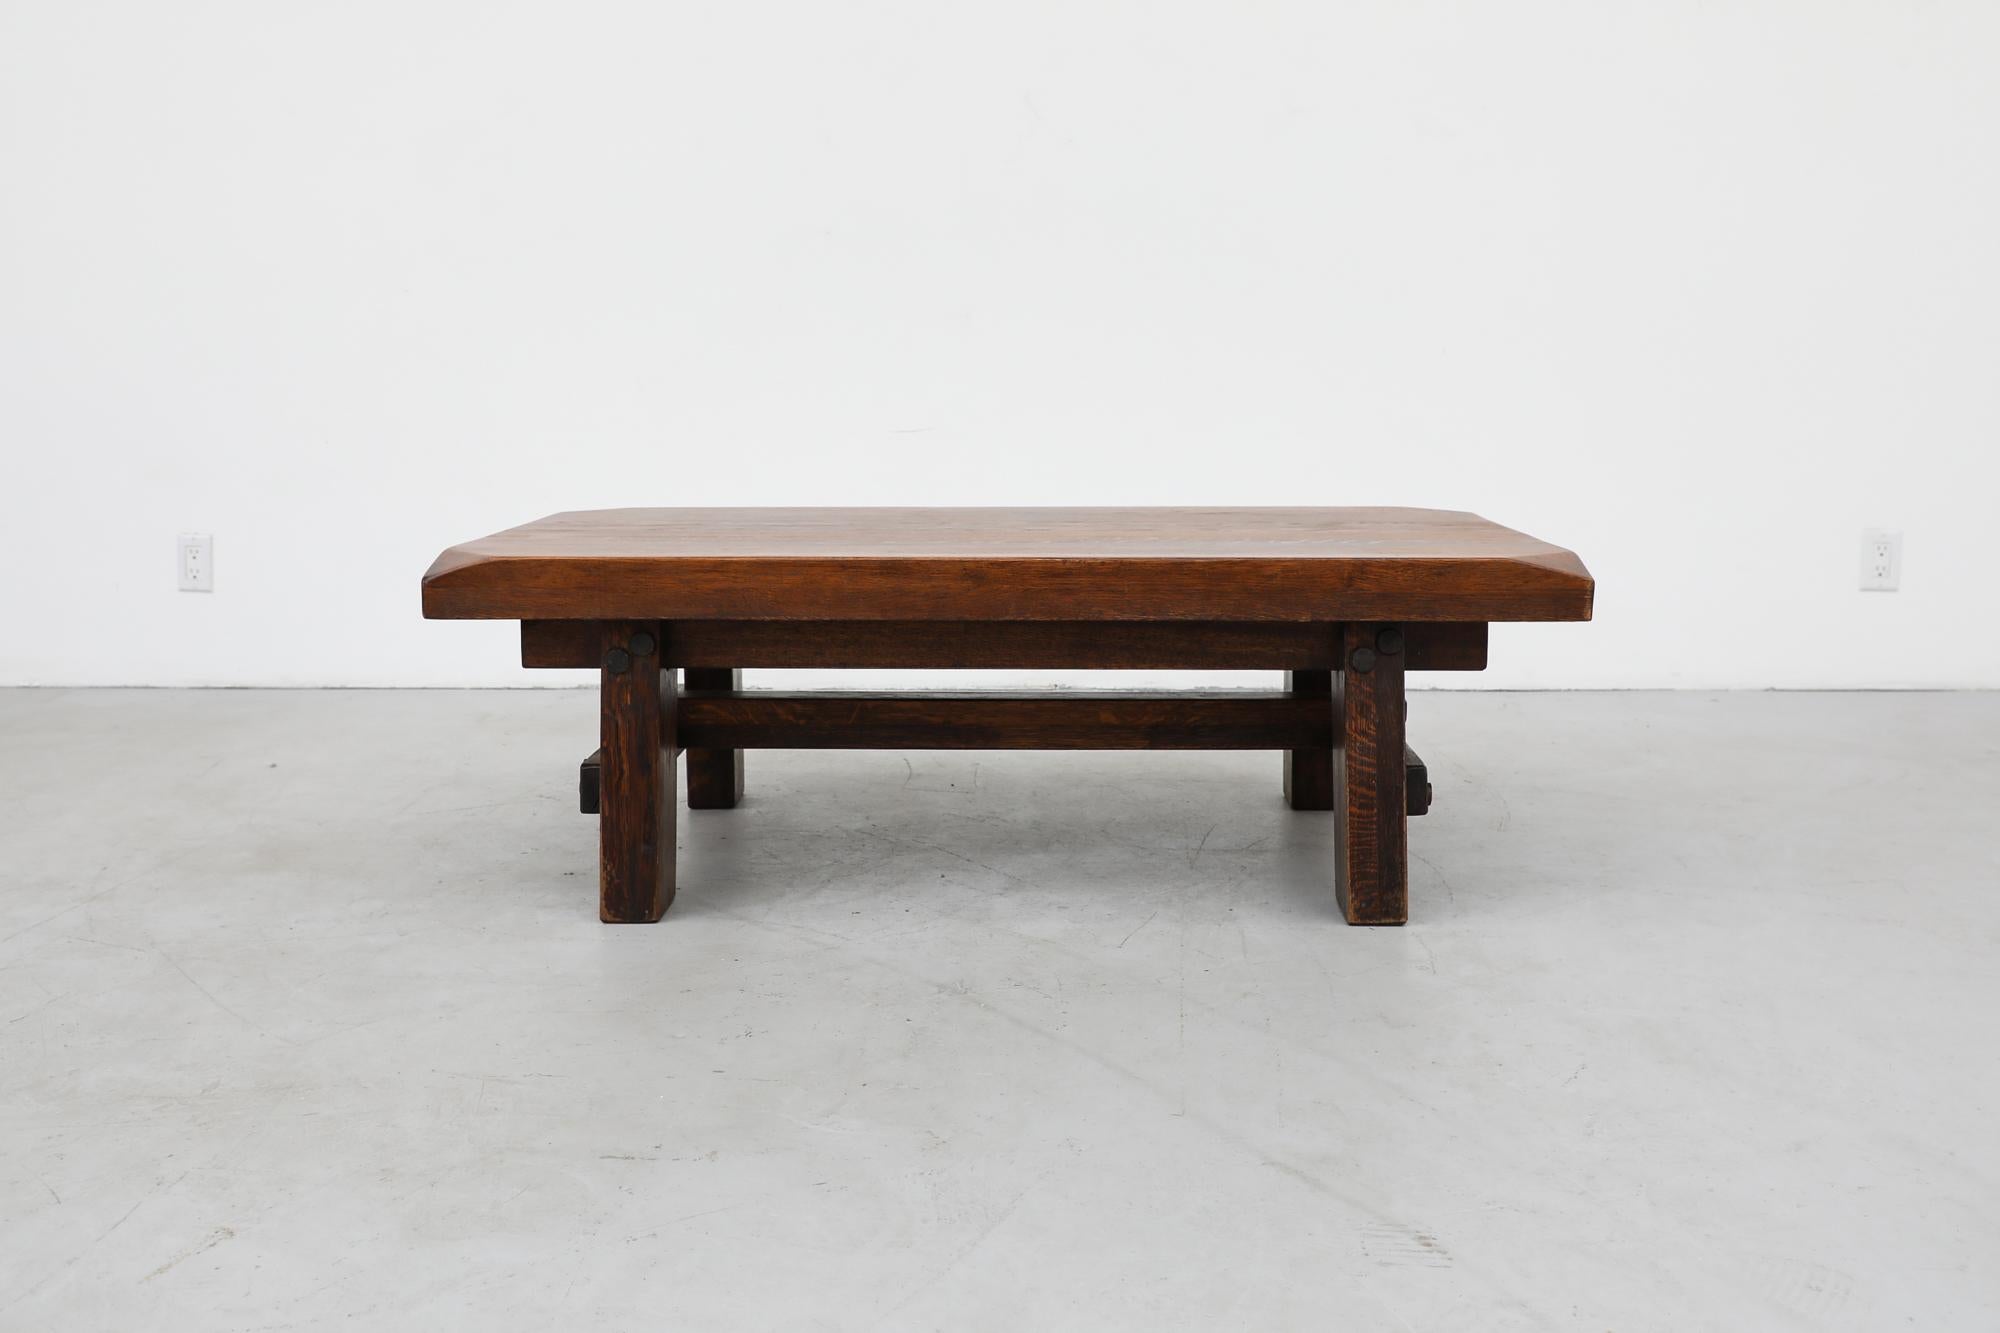 Brutalist midcentury coffee table inspired by Pierre Chapo made from thick solid oak. The table has hefty legs and a sturdy support beam. The frame is fastened together with large pegs. In original condition with visible wear, consistent with its